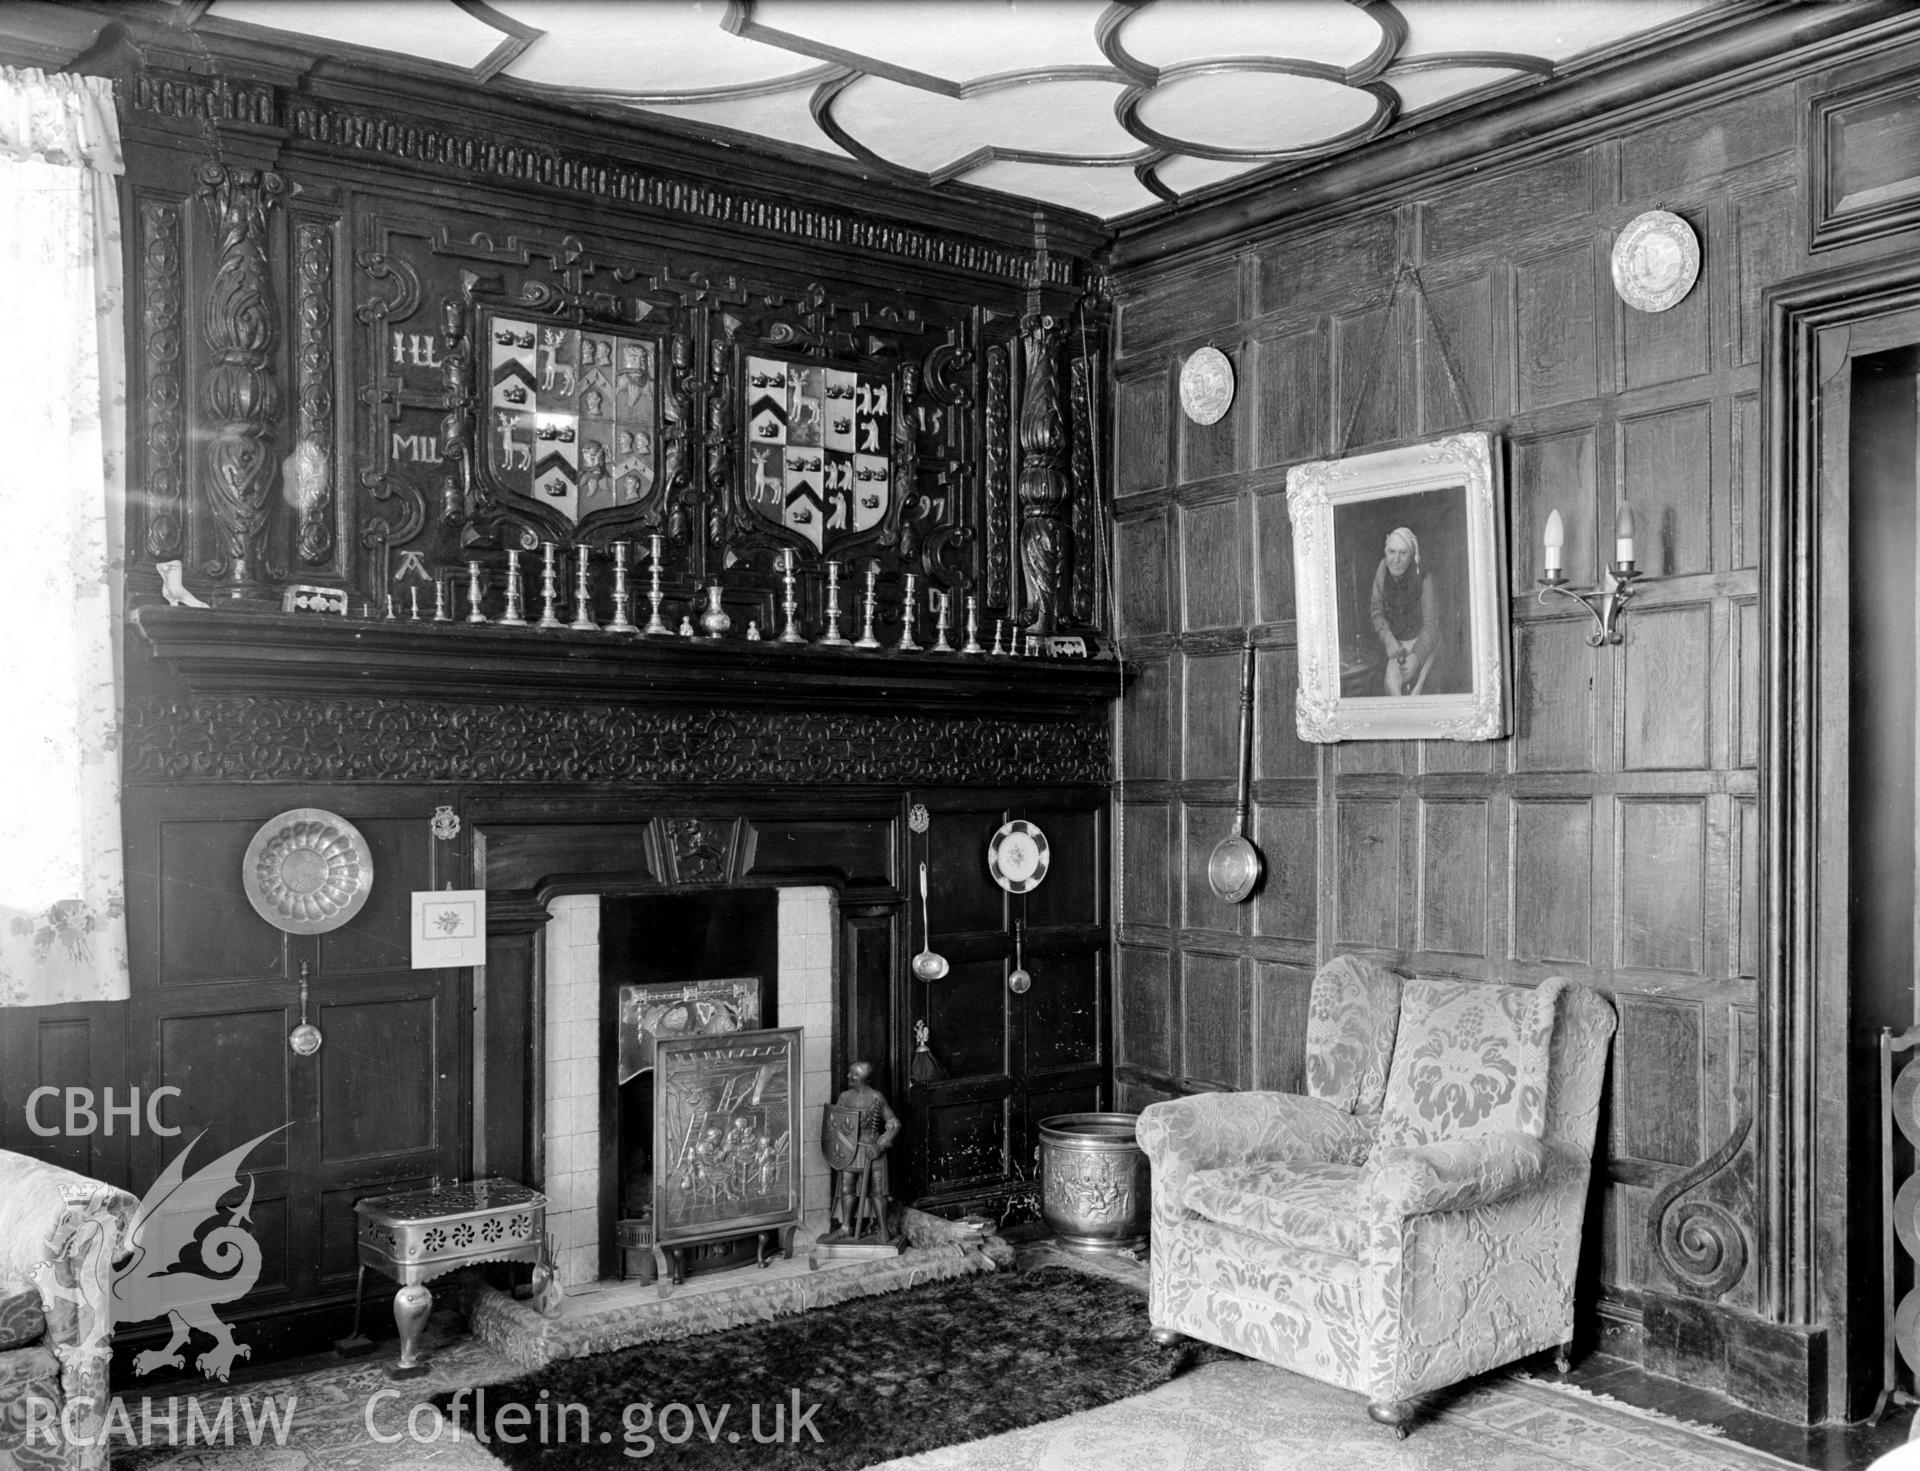 Carved Fireplace. Tudor wood panelled walls. Above the fire place are two different coat of arms.